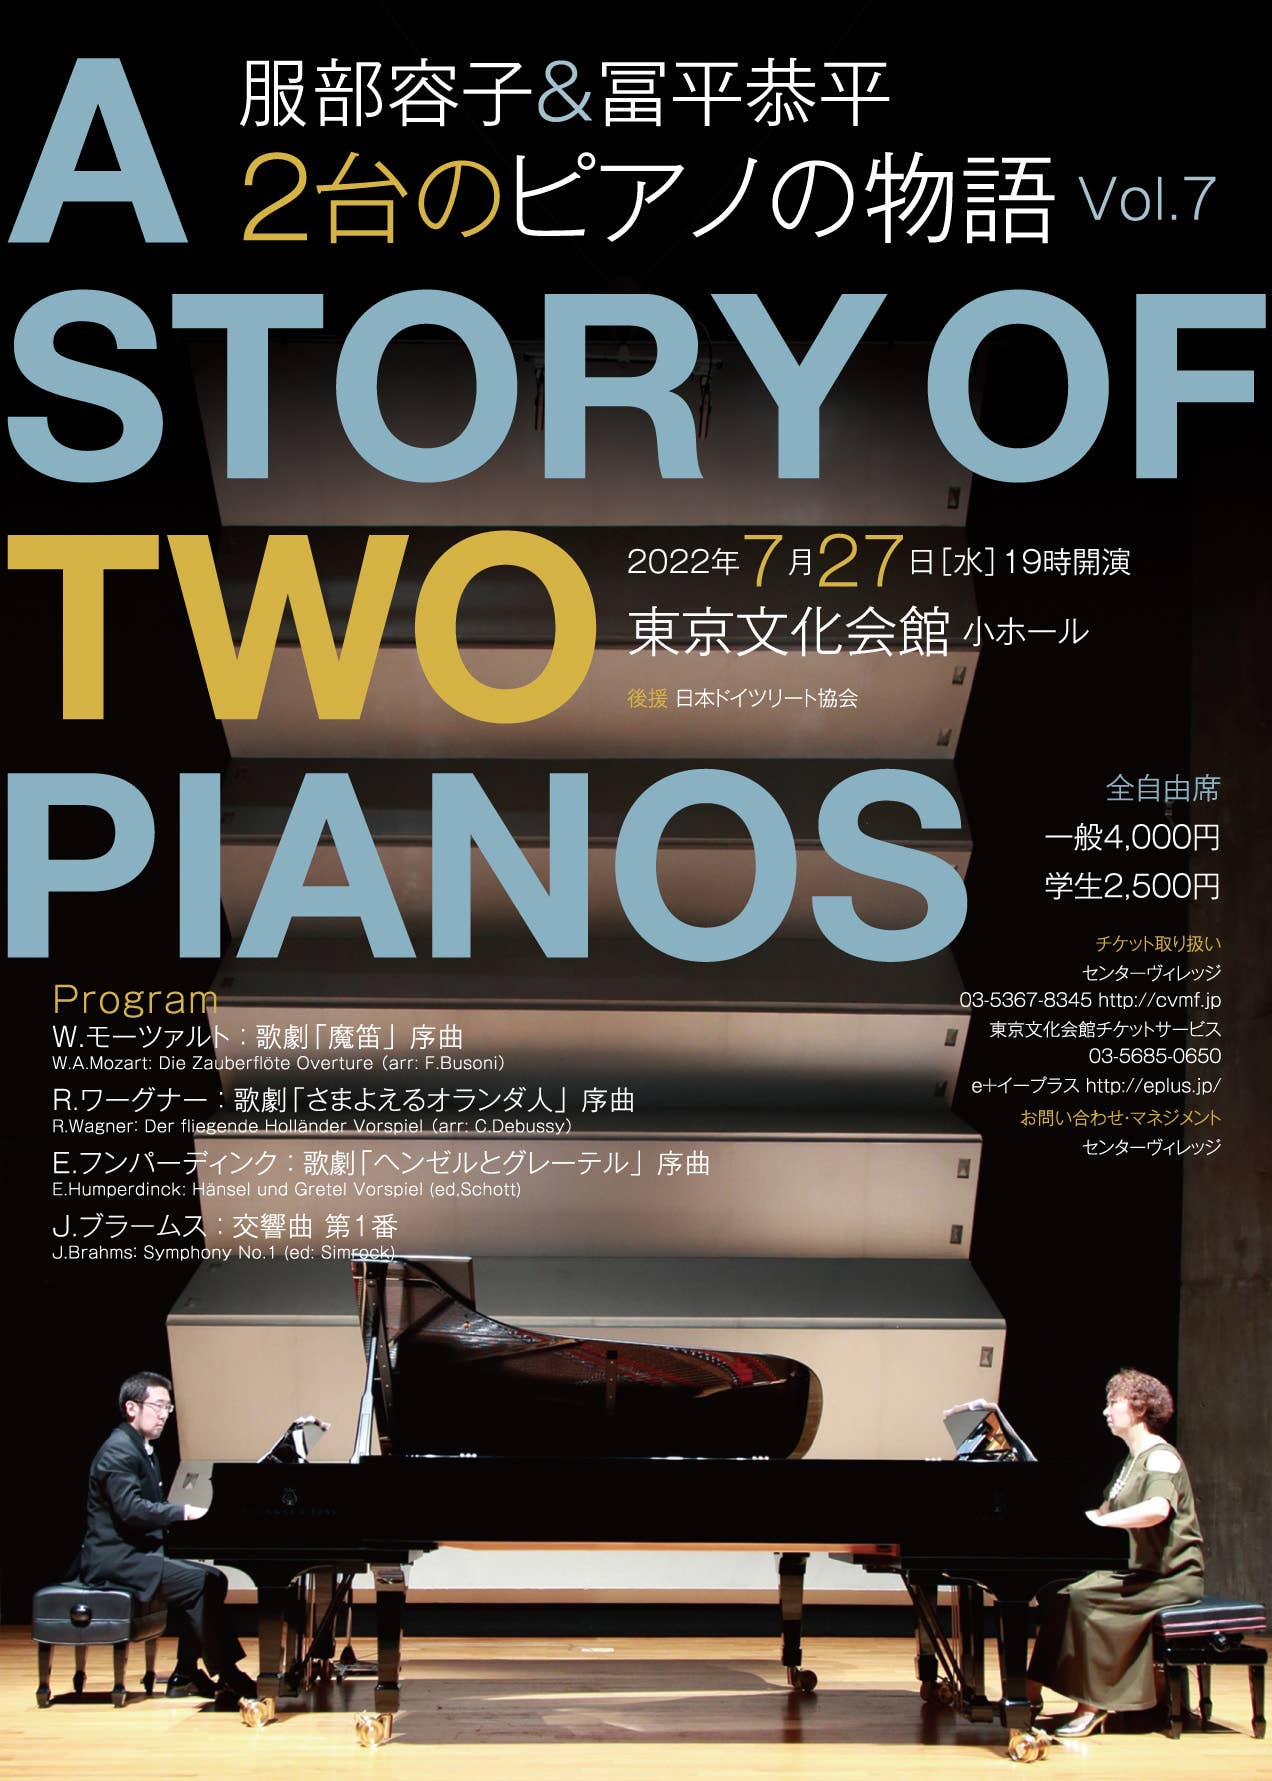 2piano_22_A4_omote_T_Cw5dzTY